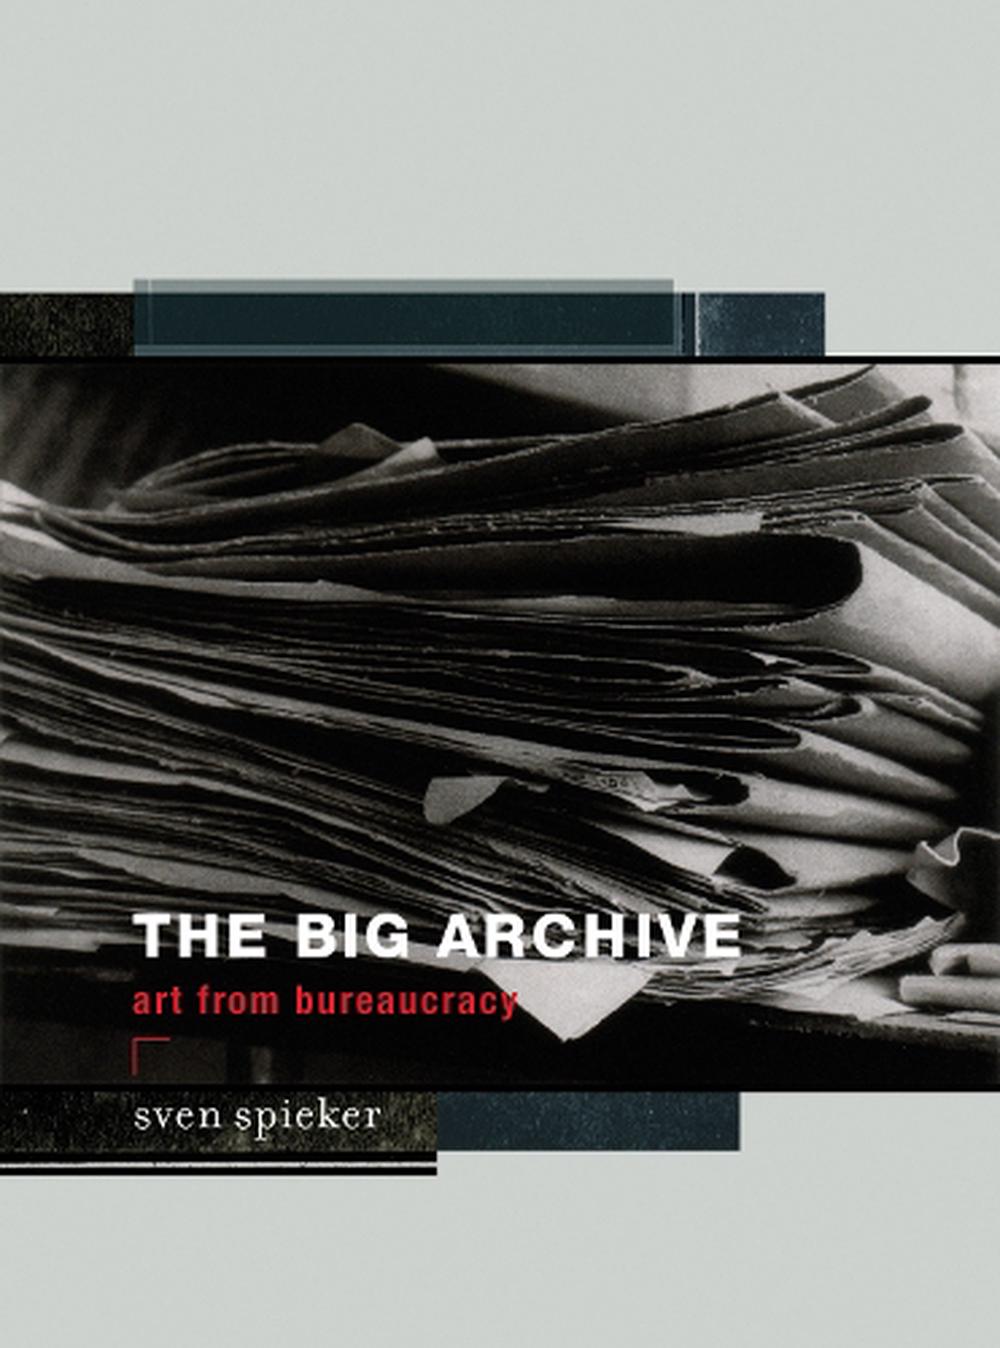 Big Archive Art From Bureaucracy by Sven Spieker (English) Paperback